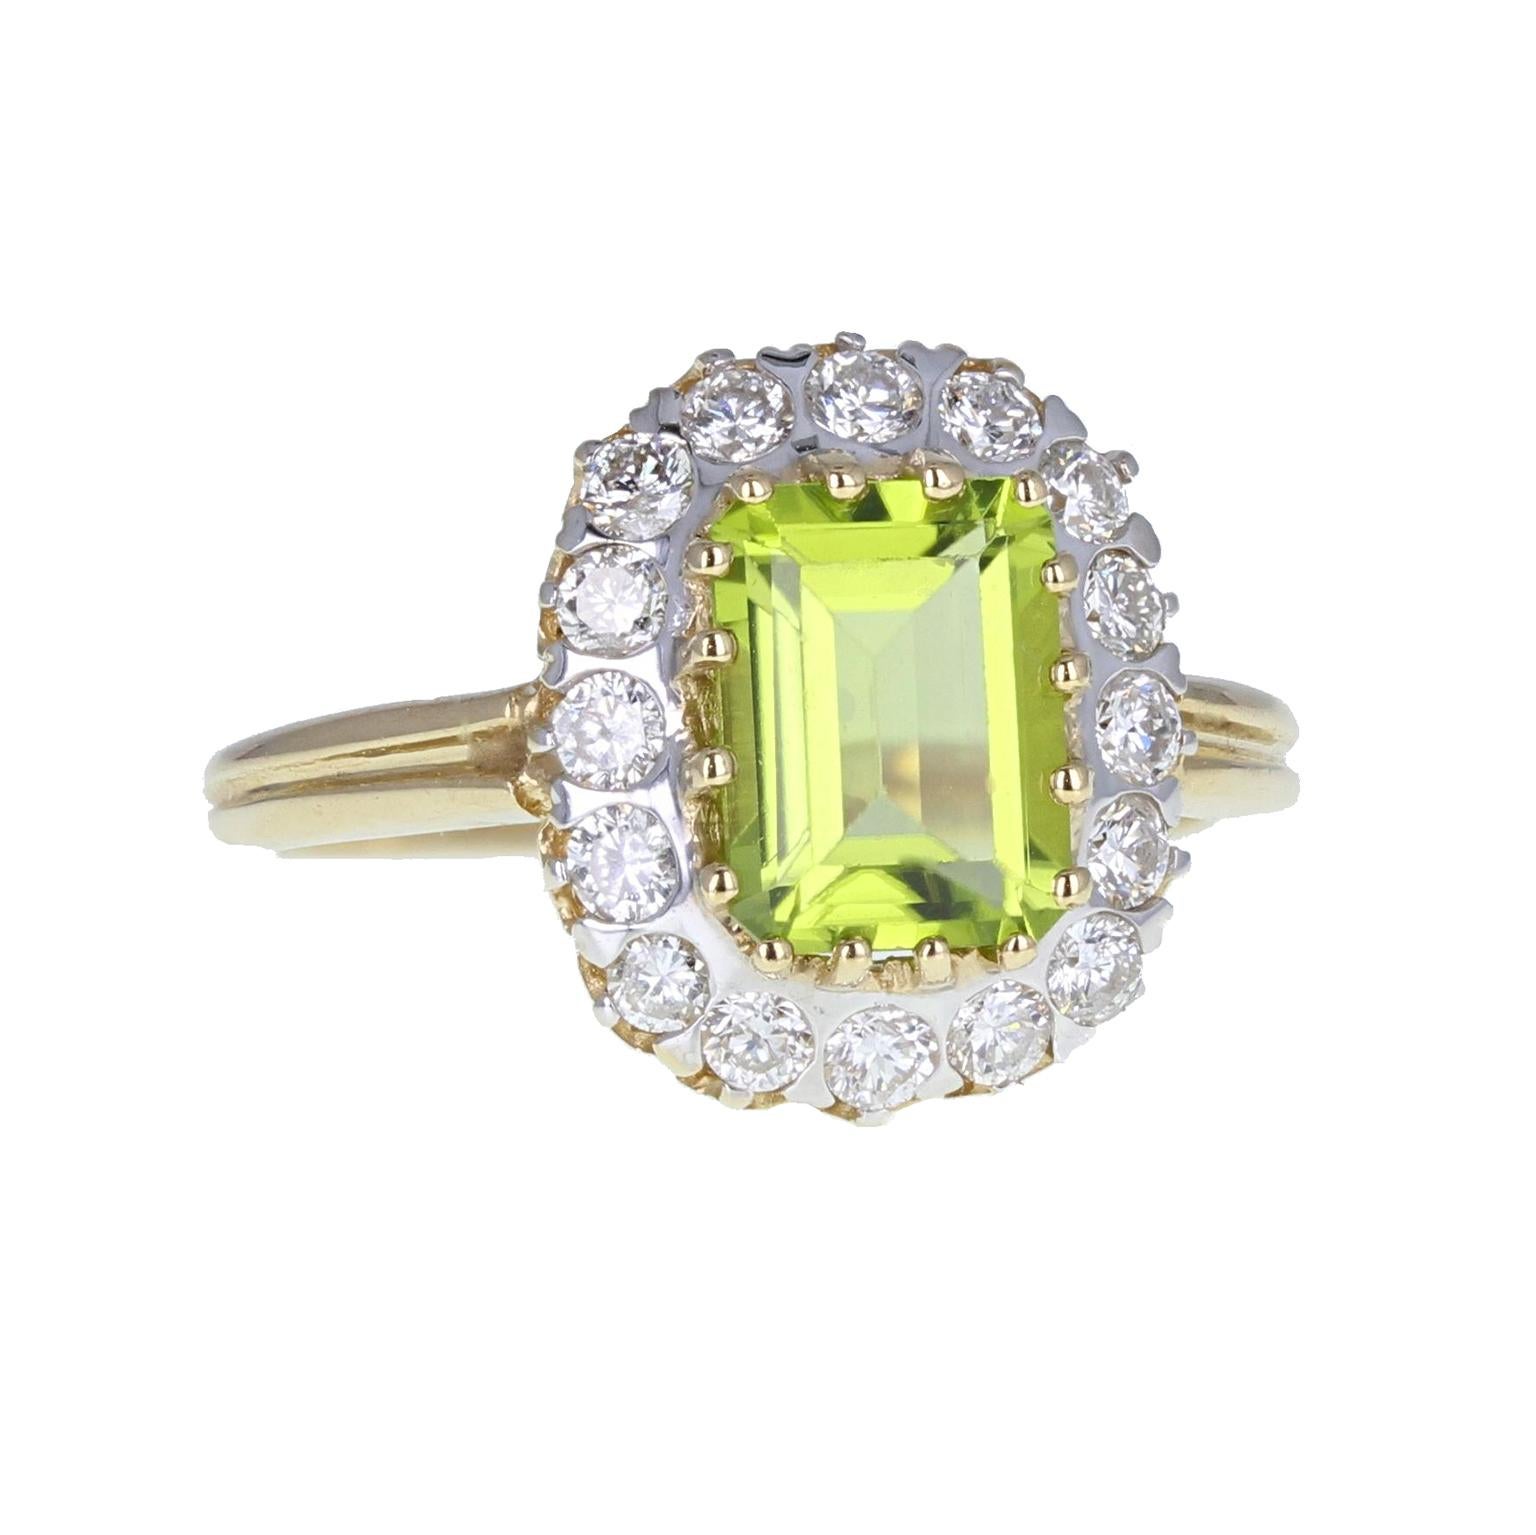 A stylish and unusual vintage cocktail ring featuring a fabulous lime-green coloured emerald-cut peridot mounted in 14-carat yellow gold claws. Surrounded by 16 round brilliant-cut diamonds to form a rectangular cluster. The simple slightly tapering